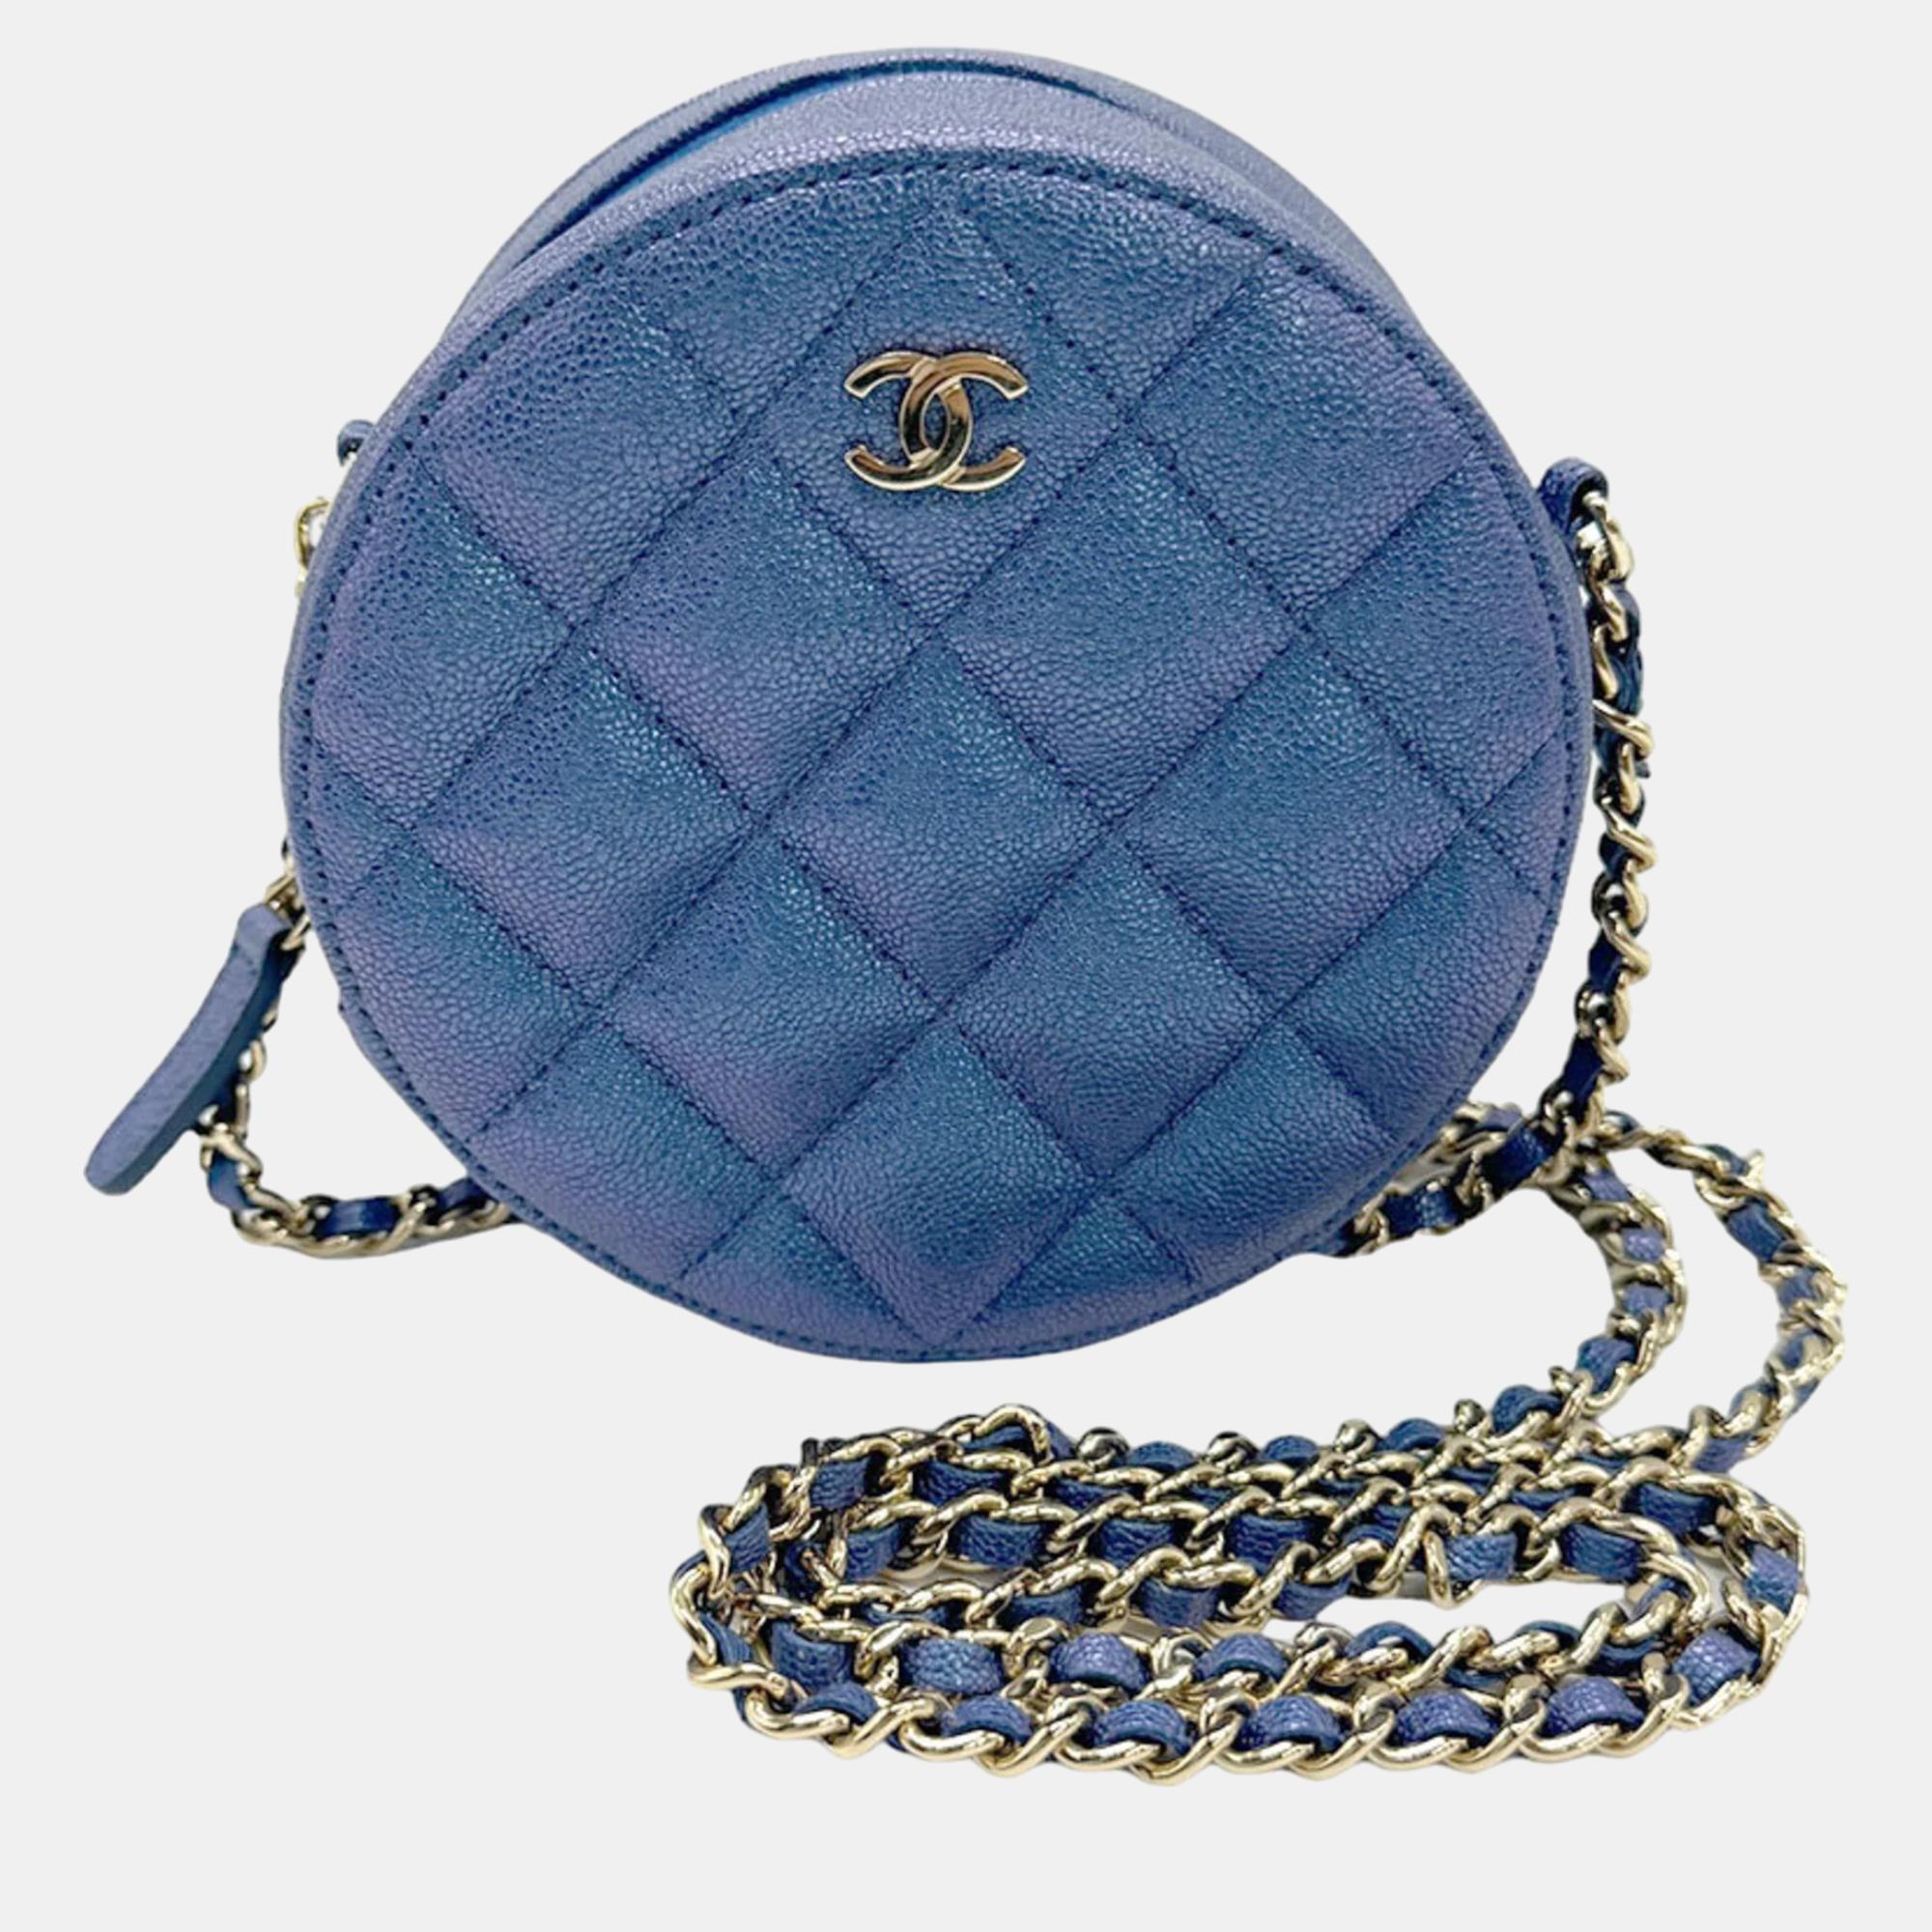 Pre-owned Chanel Metallic Blue Leather Round Cc Shoulder Bag